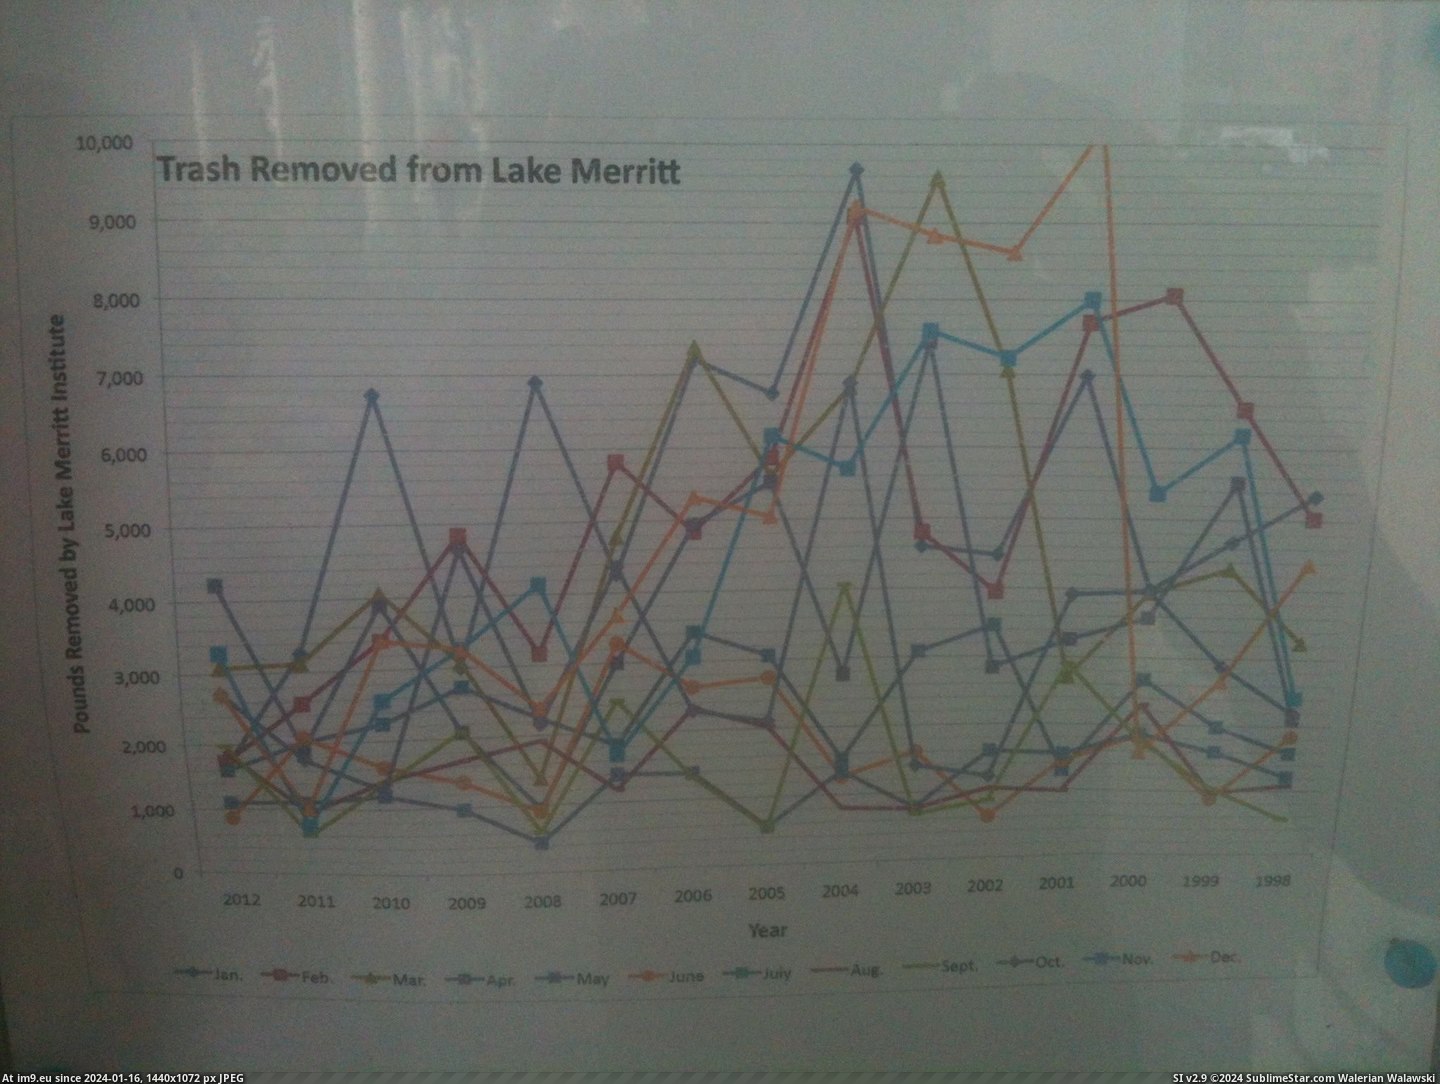 #Lake #Chart #Improved #Merritt #Removed #Trash [Dataisbeautiful] [OC] I improved a chart: “Trash Removed from Lake Merritt”—before and after 2 Pic. (Изображение из альбом My r/DATAISBEAUTIFUL favs))